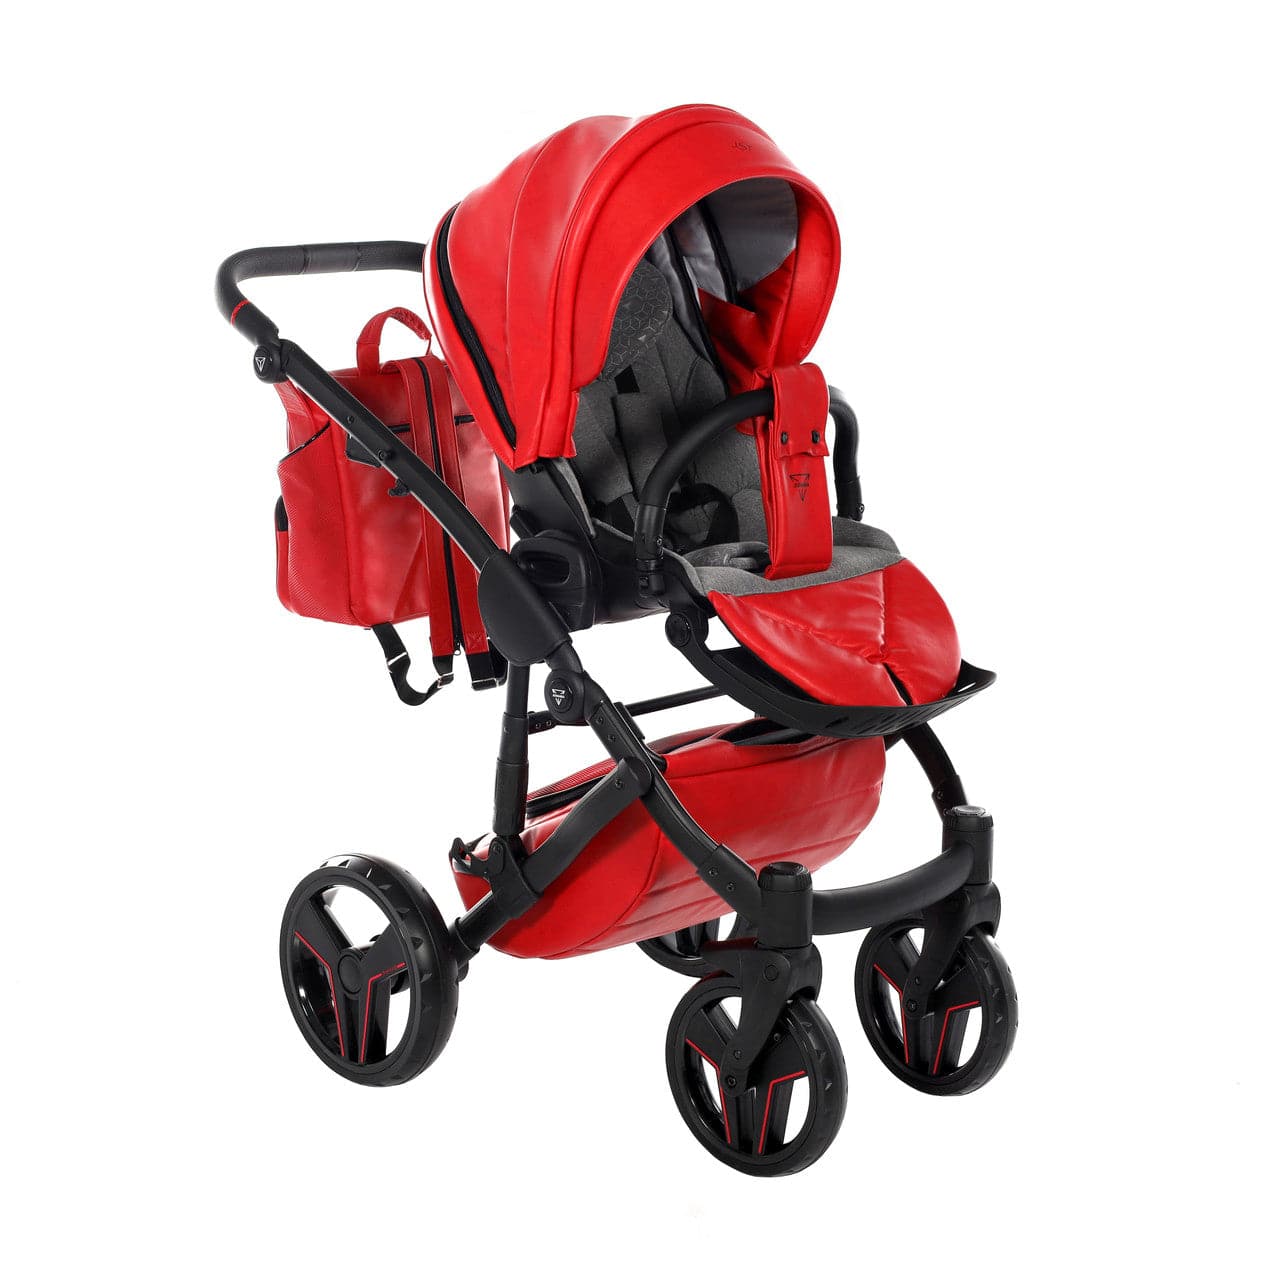 Junama S-Class 3 In 1 Travel System - Red - For Your Little One